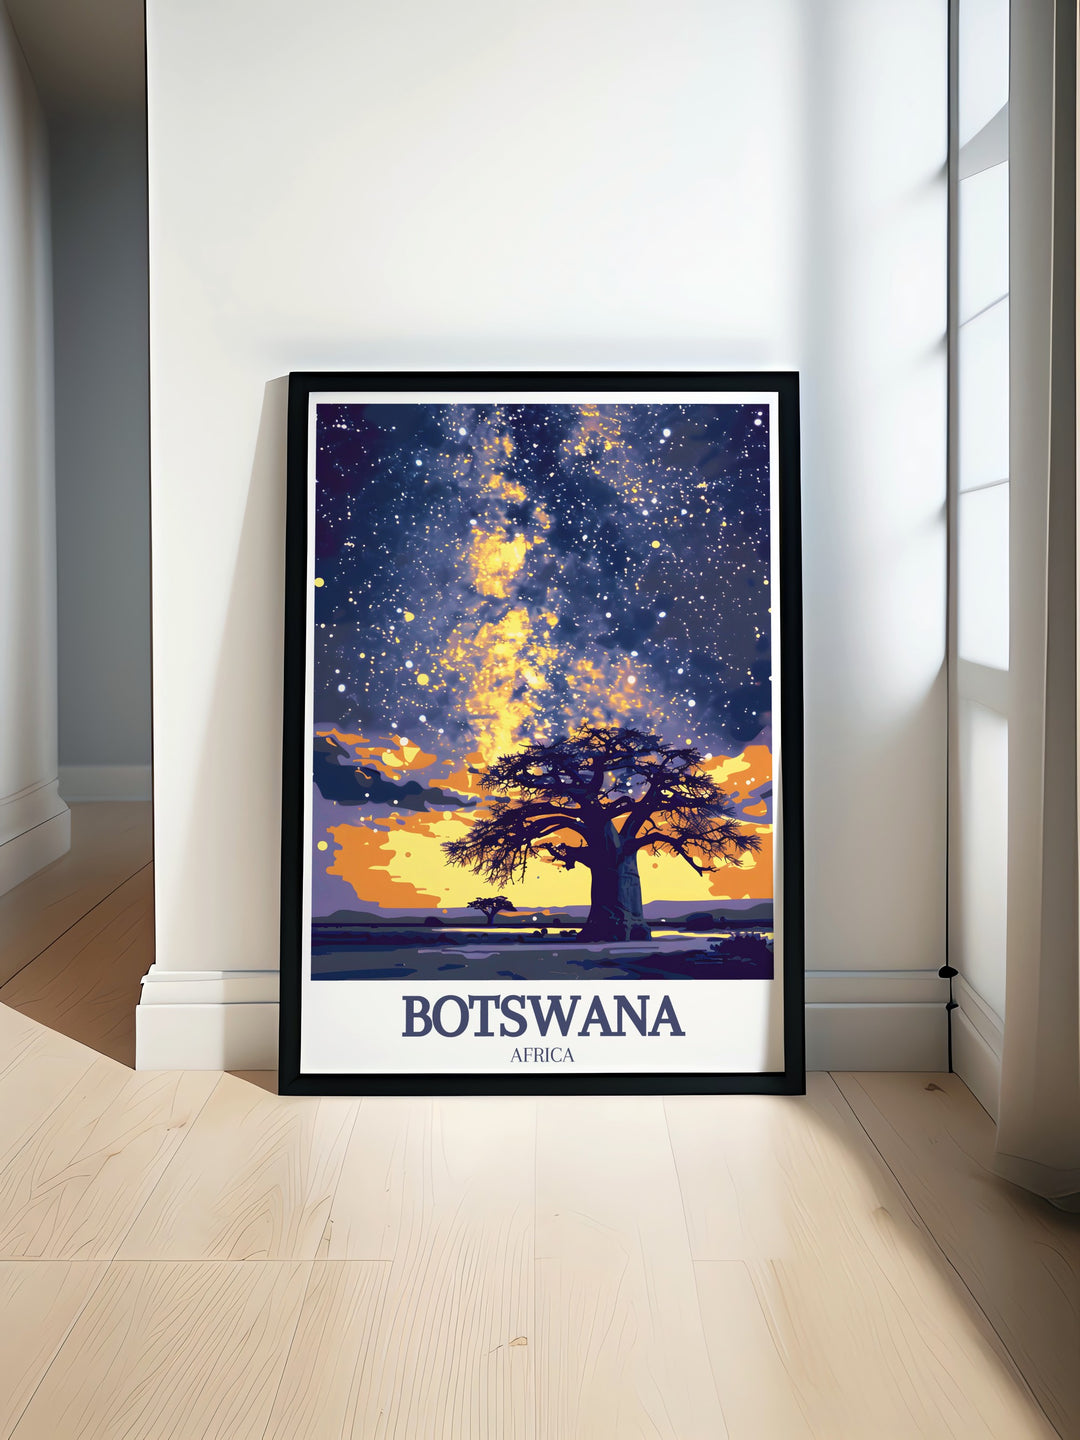 Stunning Botswana wall art featuring the Kalahari basin and Makgadikgadi Pans. Discover the beauty of these regions with vibrant Botswana prints perfect for home decor and art lovers seeking unique travel inspired artwork.